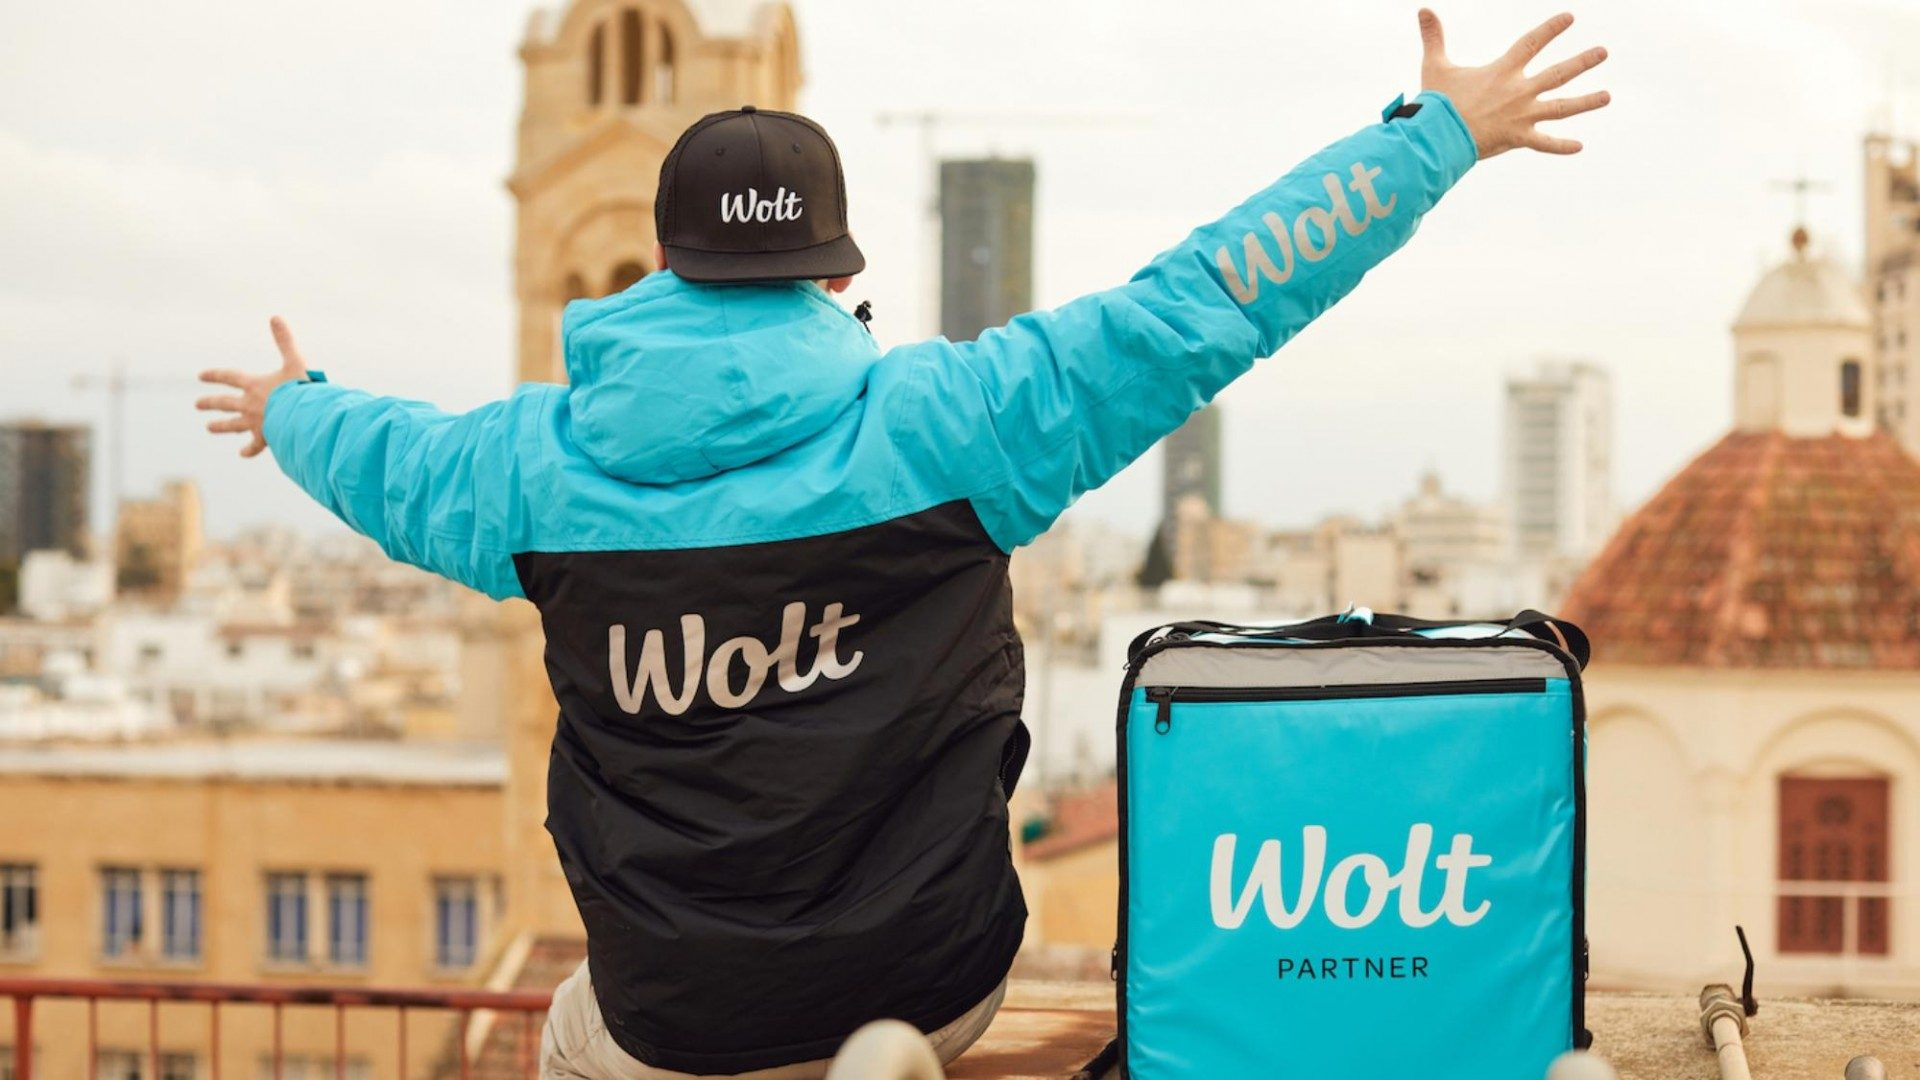 World Future Awards Recognizes Wolt for Contributing to the Food Delivery Market